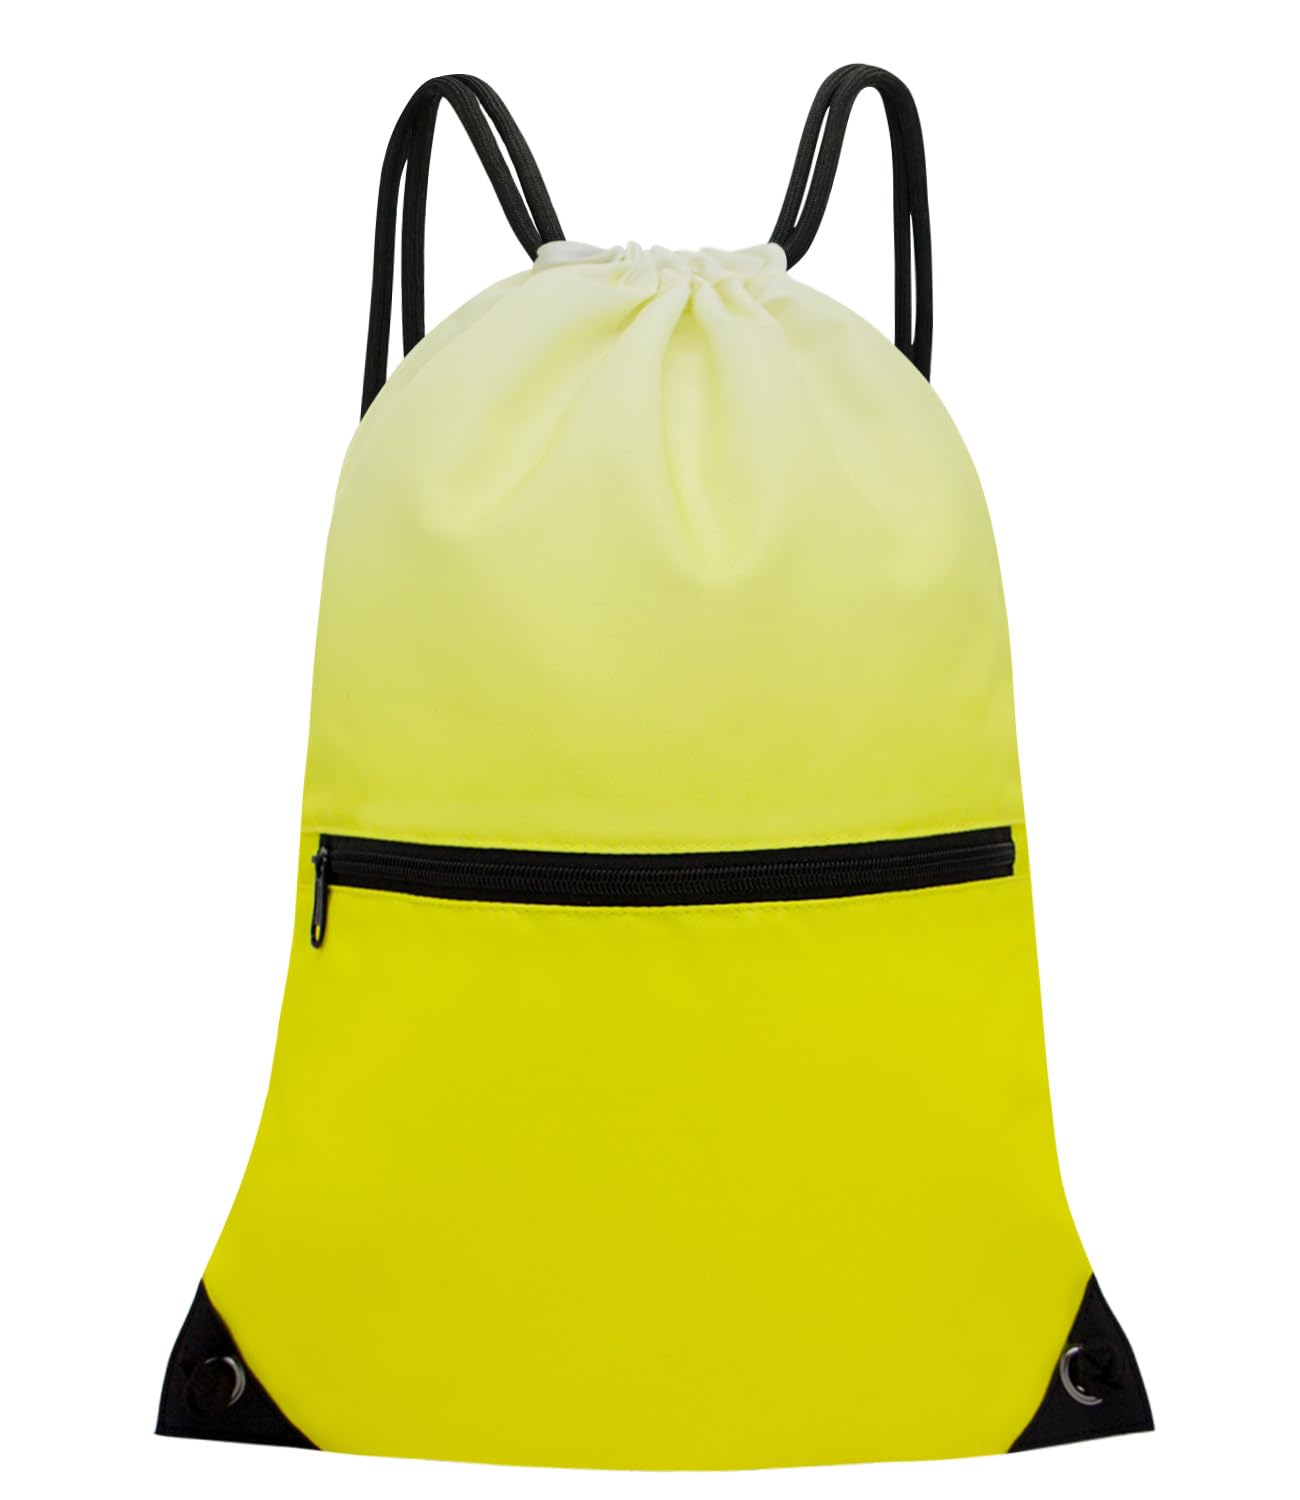 Drawstring Backpack Bag Sport Gym Sackpack Gradient Yellow HLC001